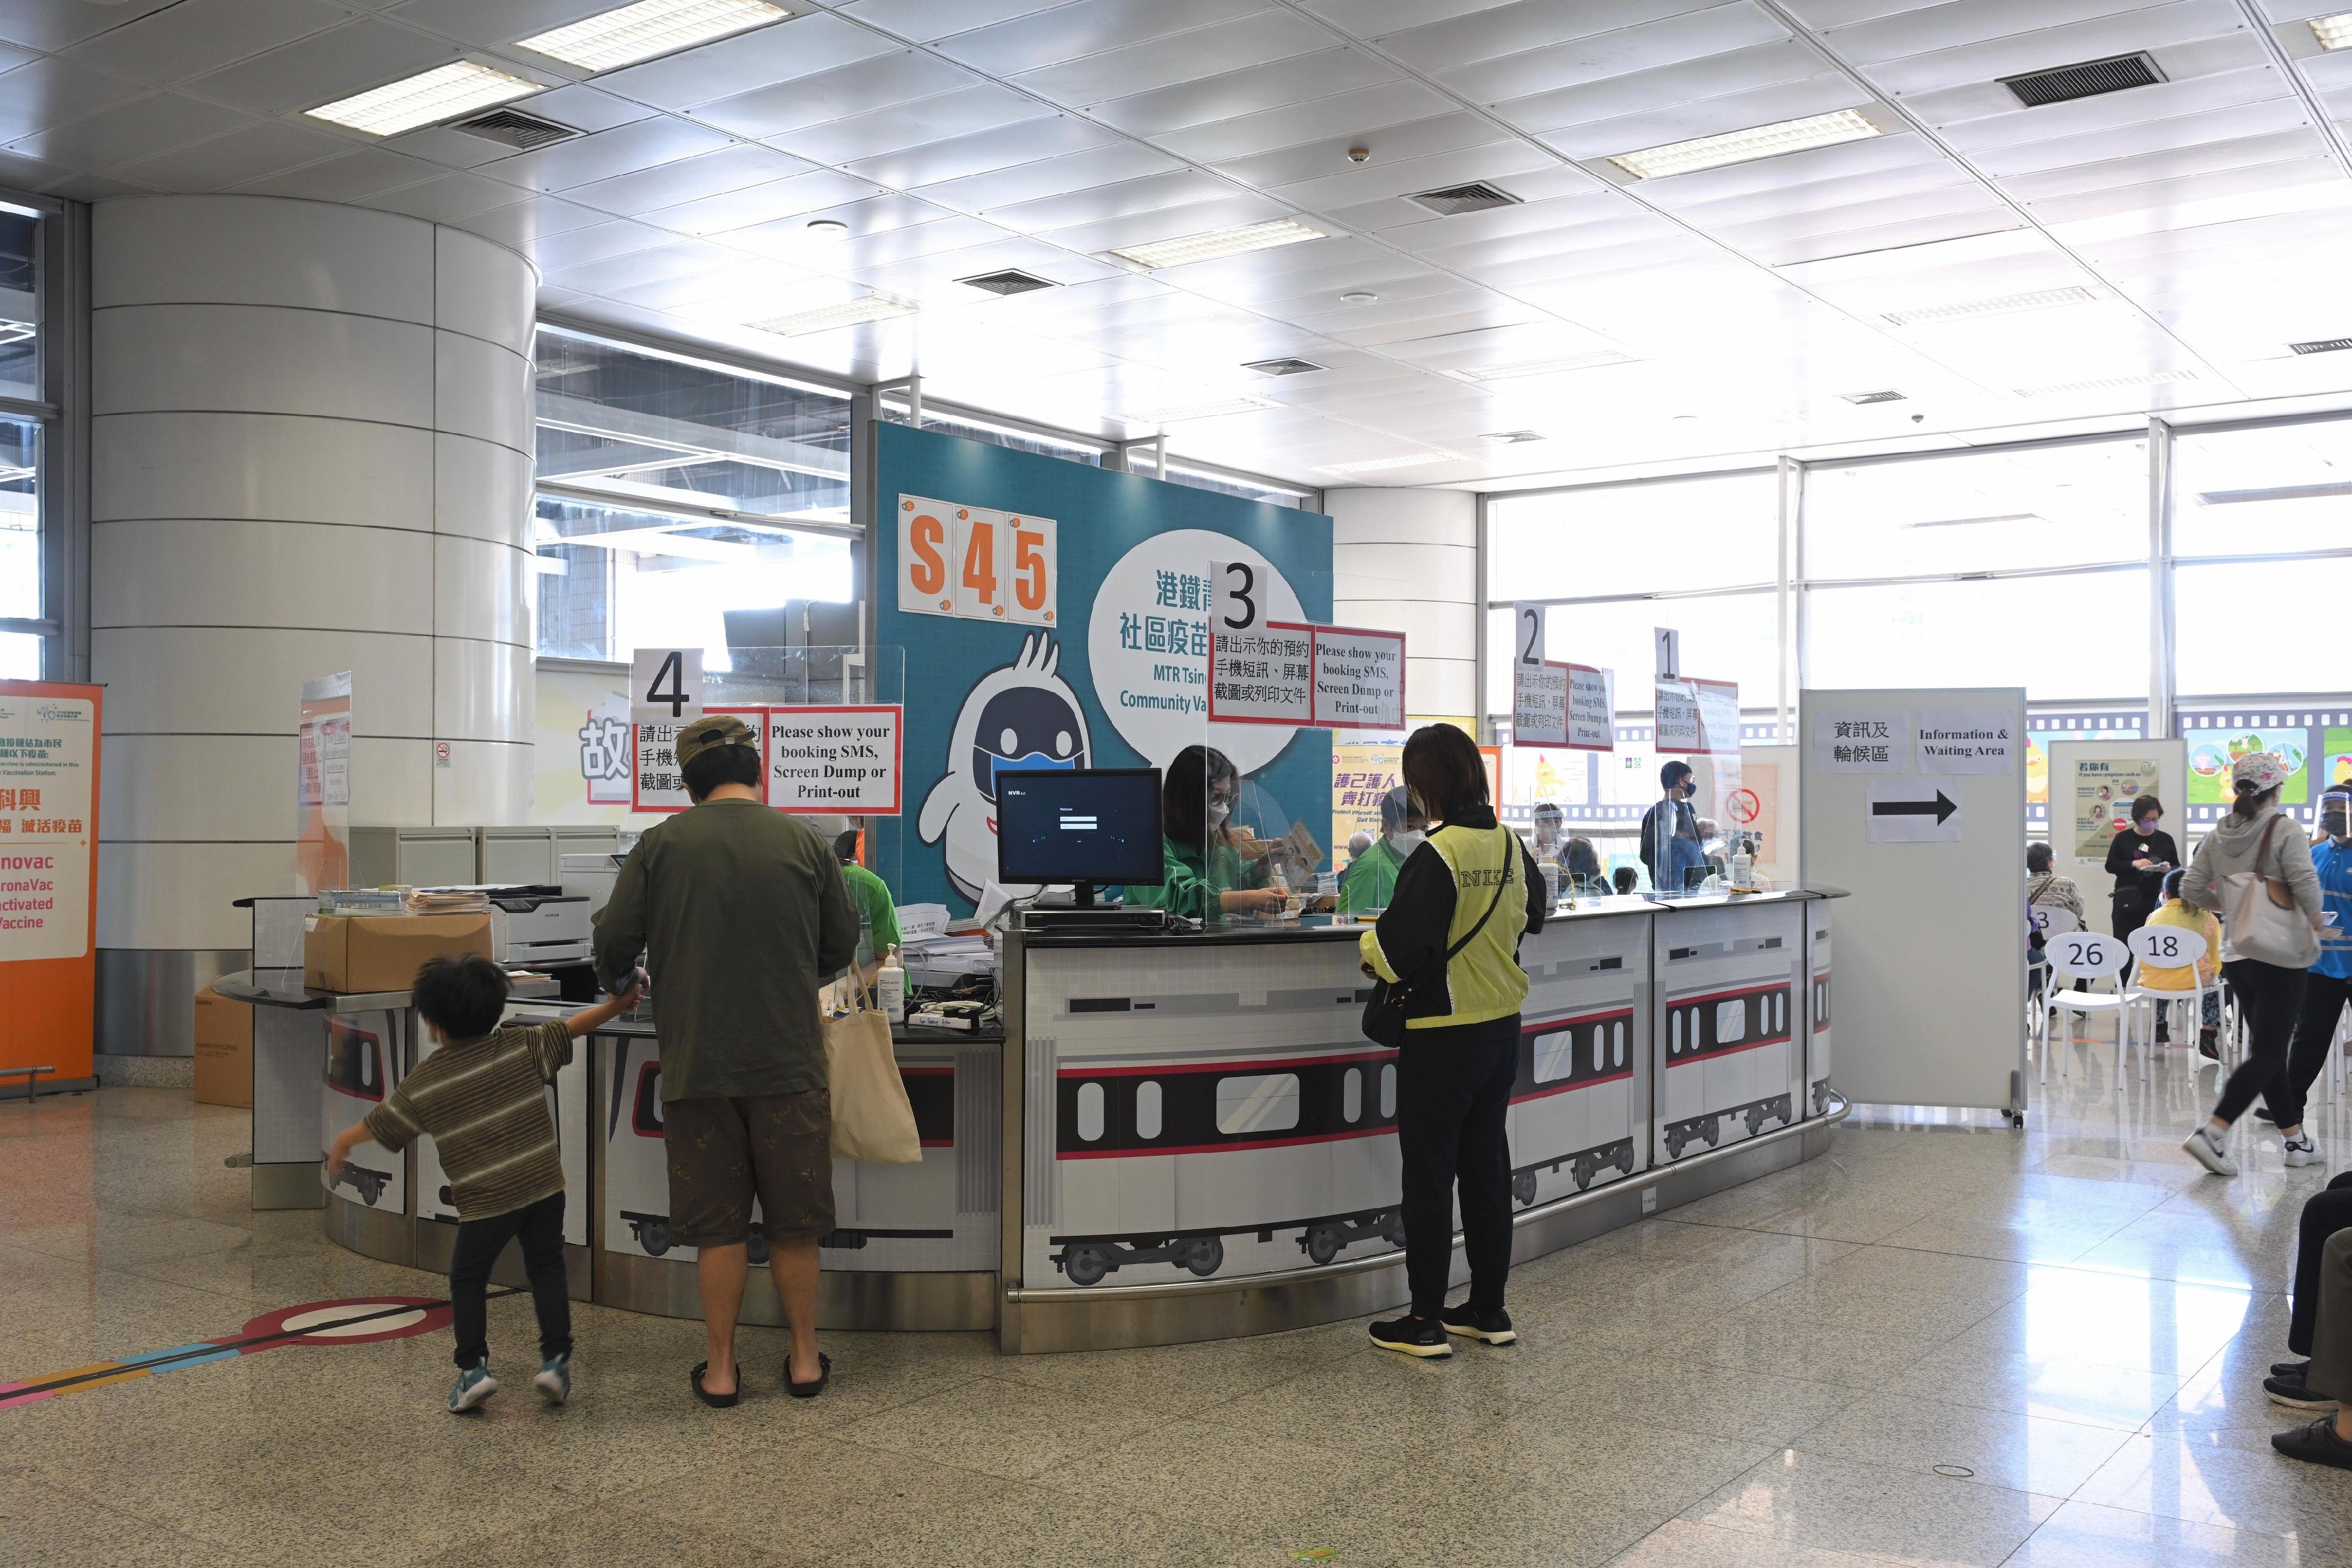 The MTR Tsing Yi Station Community Vaccination Centre (CVC) commenced operation yesterday (March 11) to provide Sinovac vaccination service to people aged 3 or above. Photos shows the reception counter of the CVC.